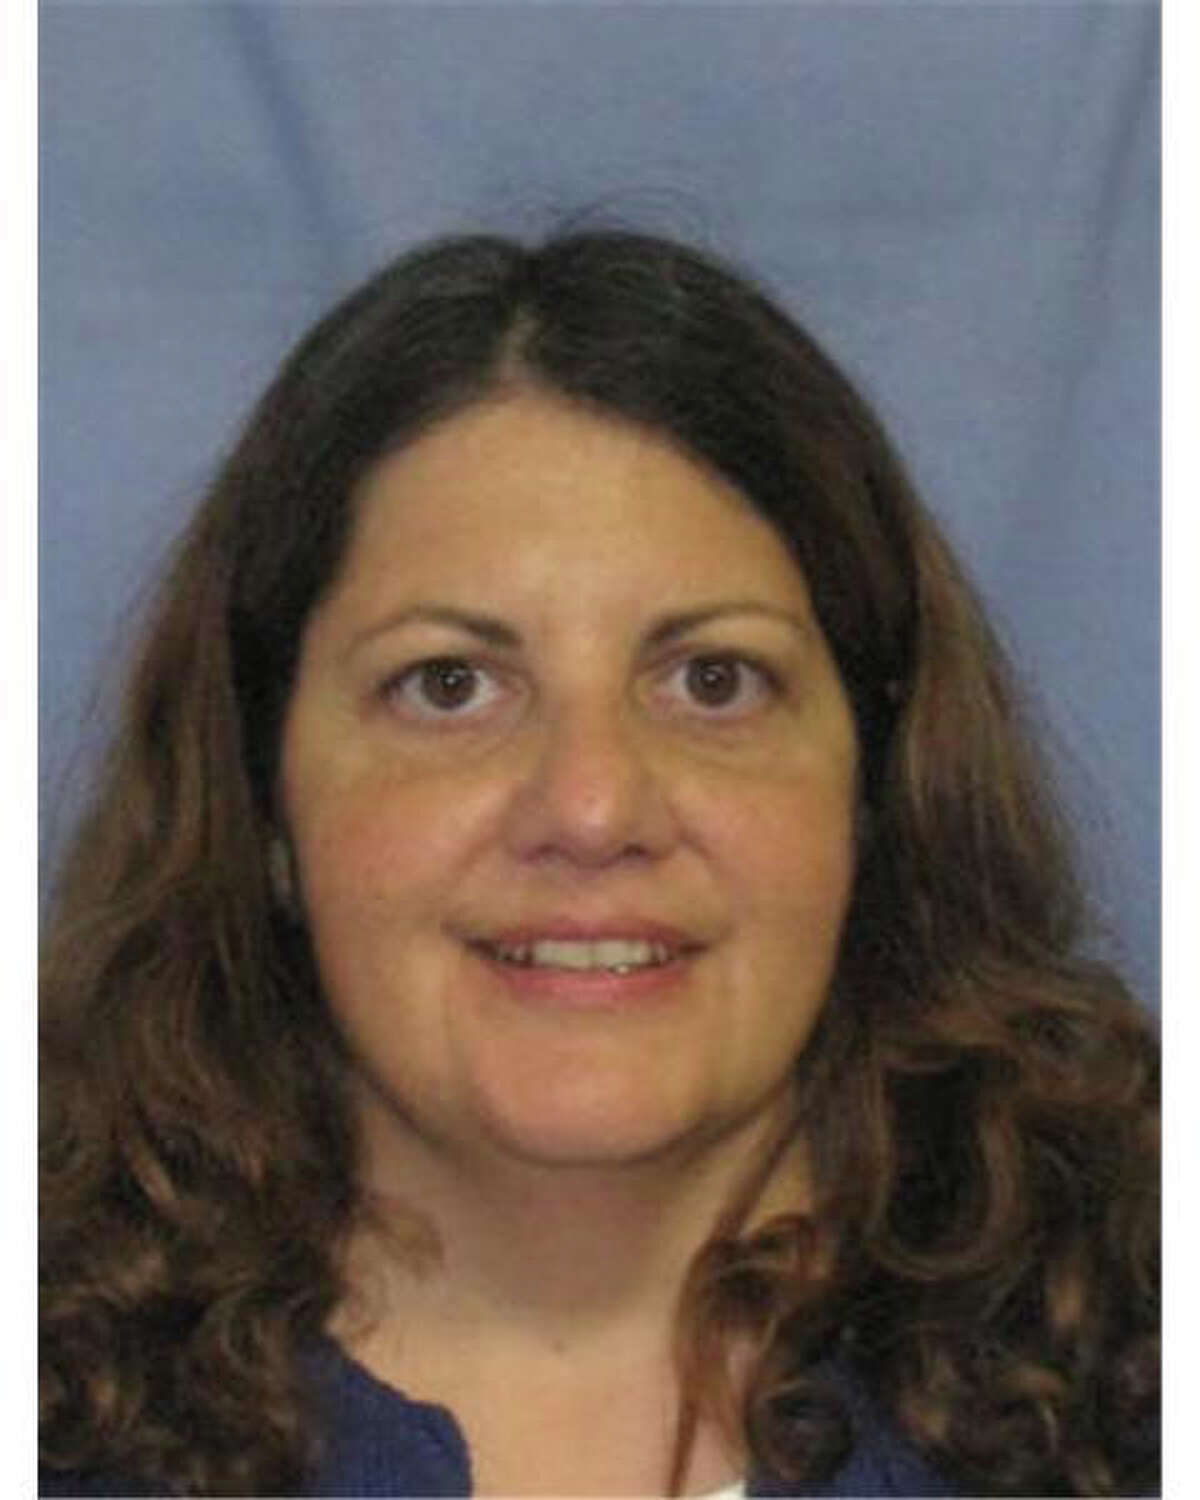 Milford Police Searching For Missing Woman